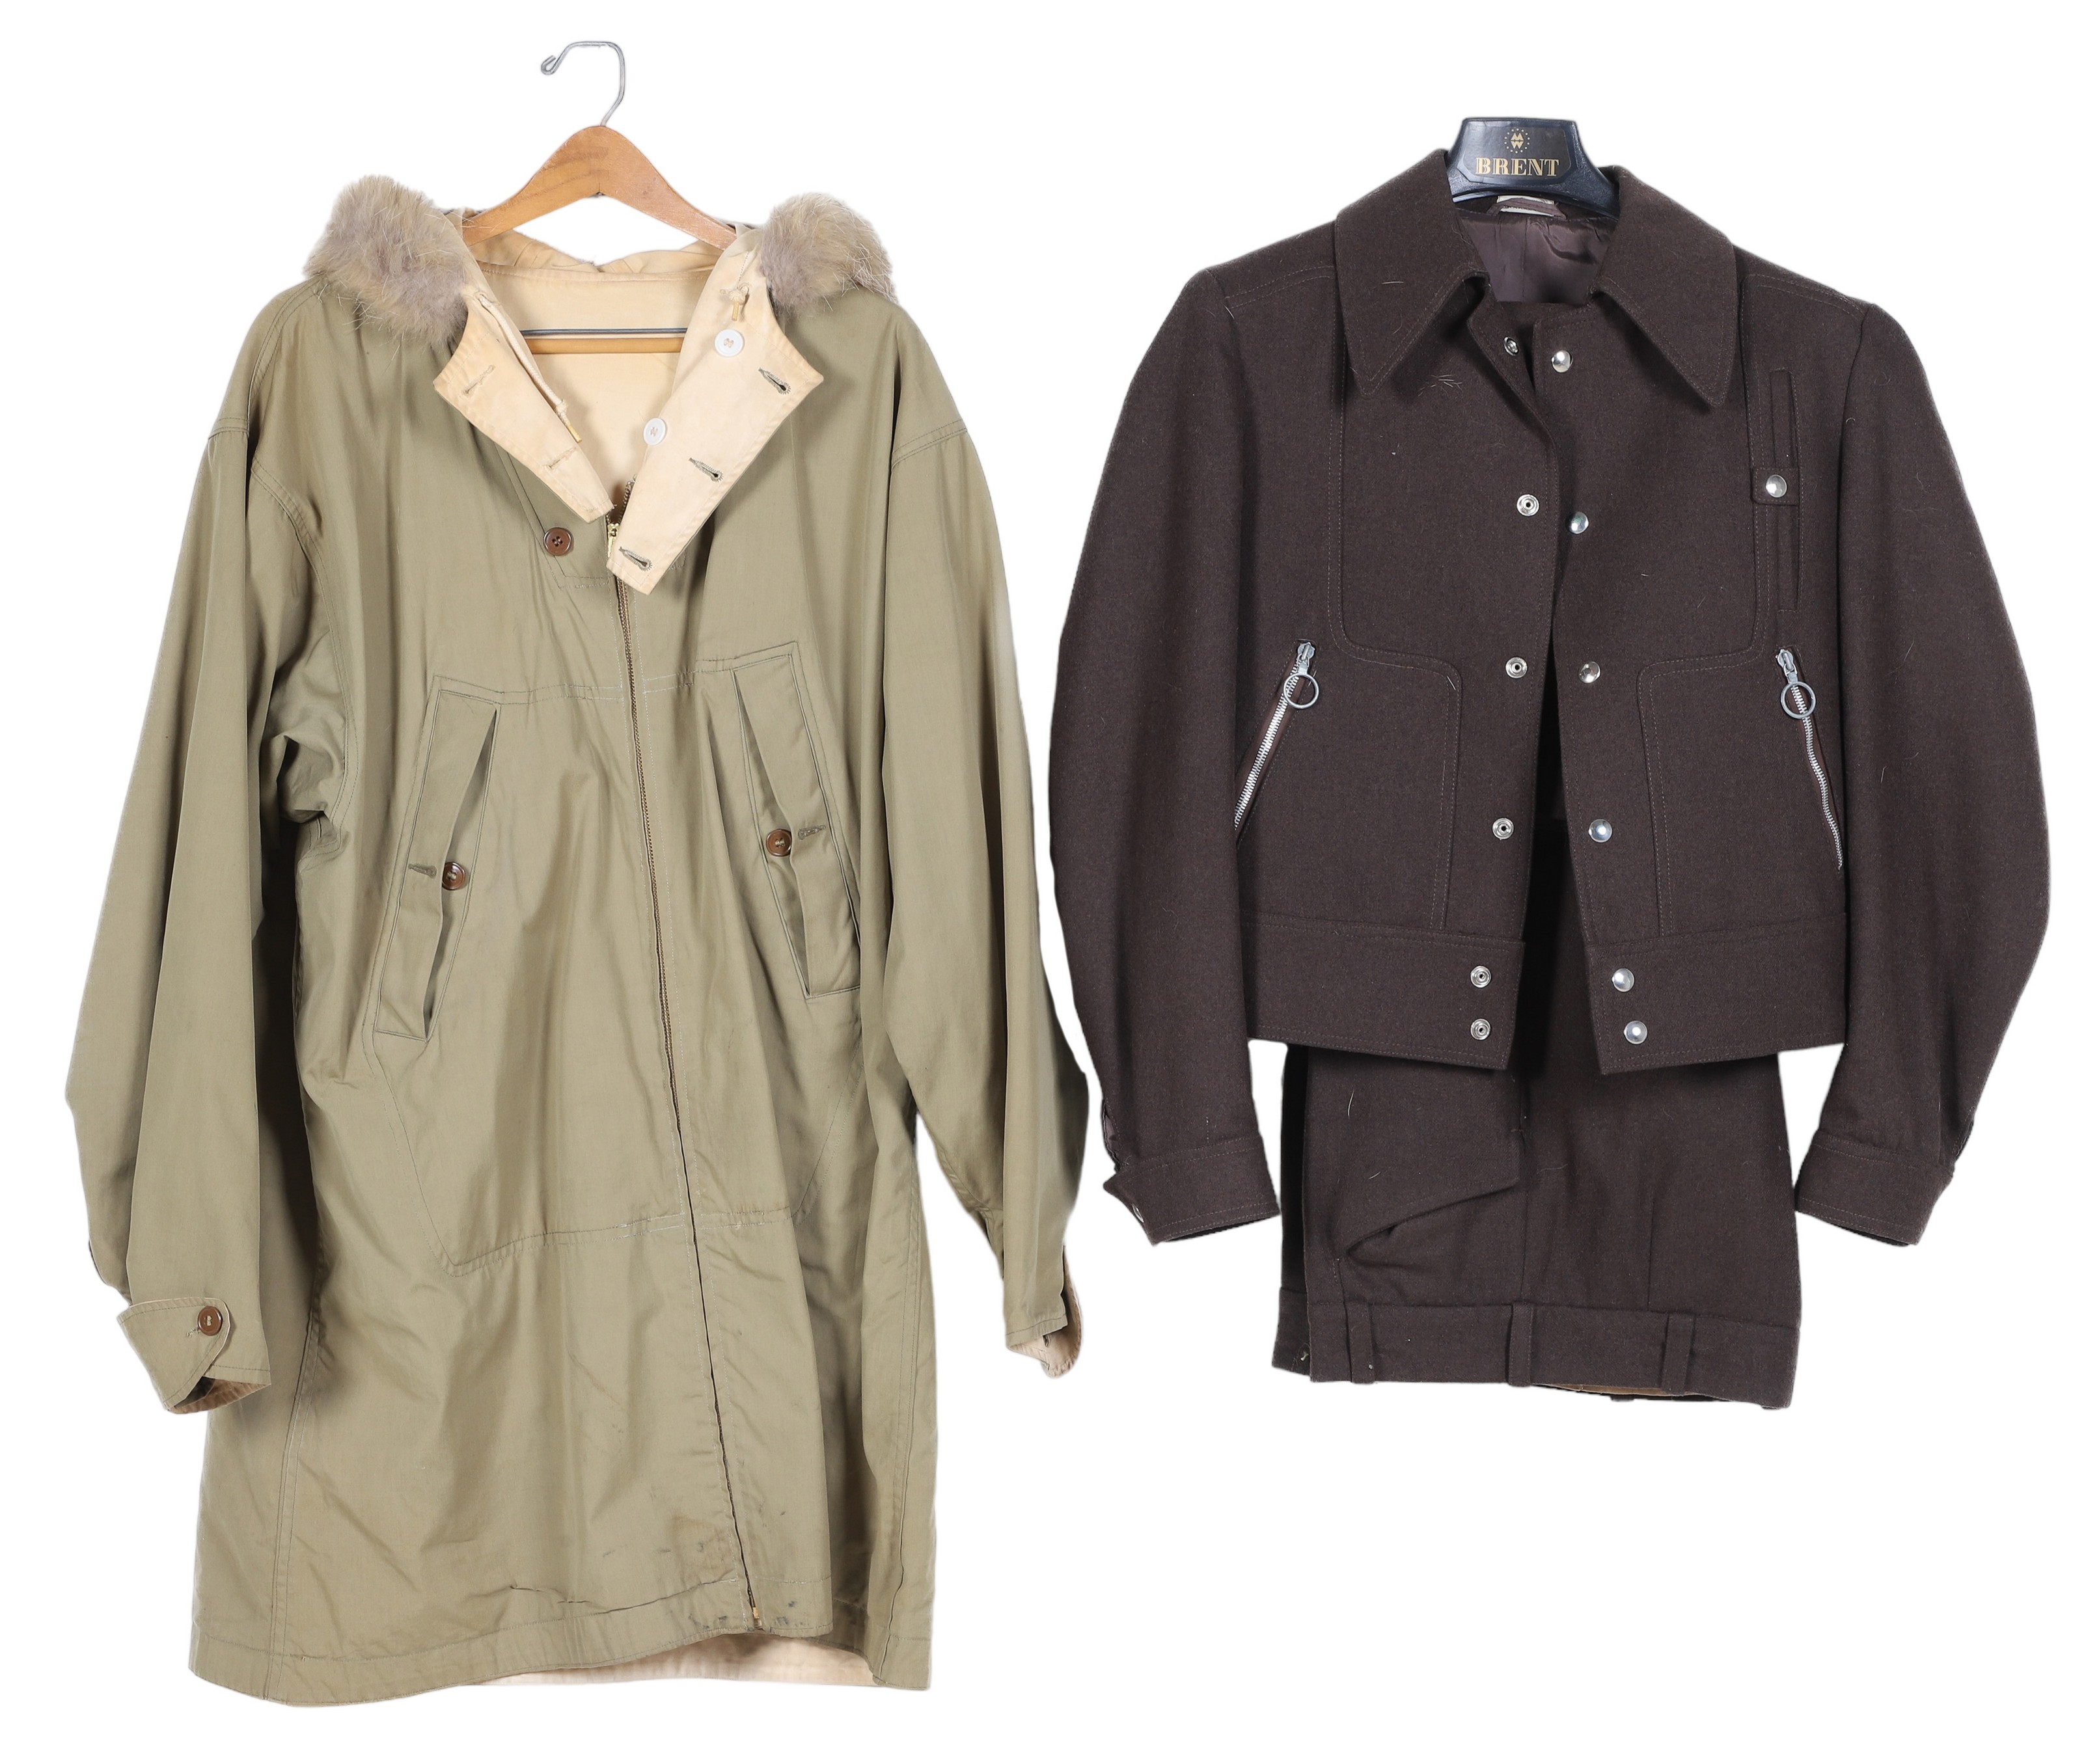 Military parka and wool suit to